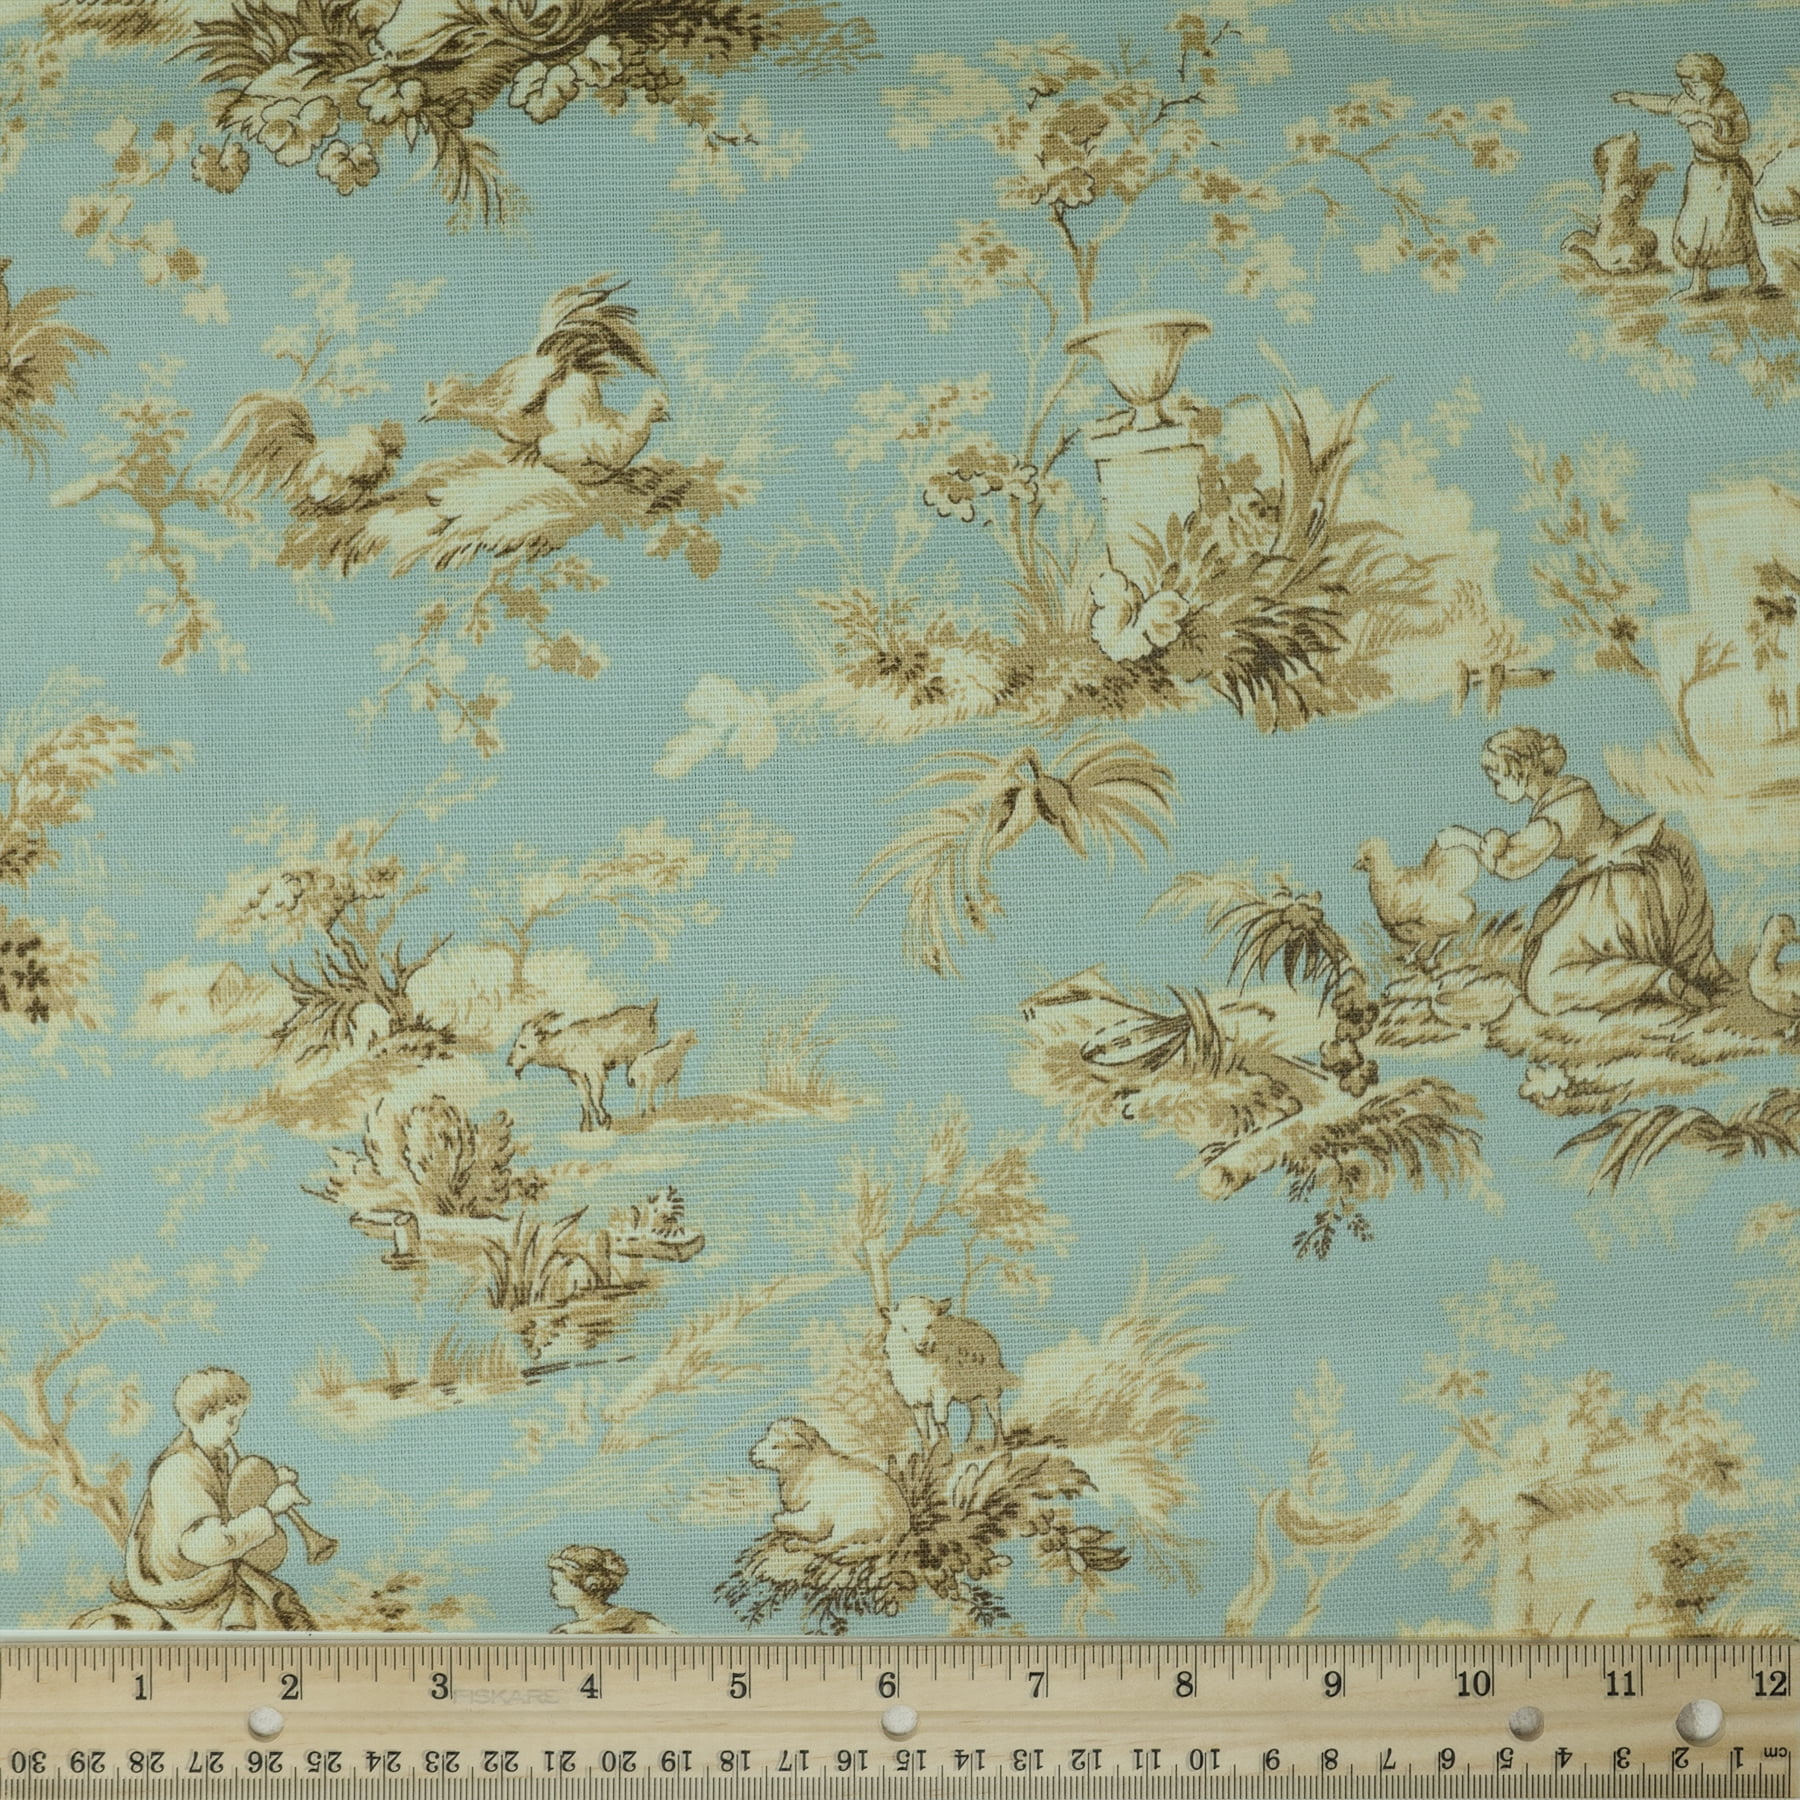 Waverly Inspirations 45 inch 100% Cotton Toile Sewing & Craft Fabric by The Yard, Spa, Size: 36 inch x 45 inch